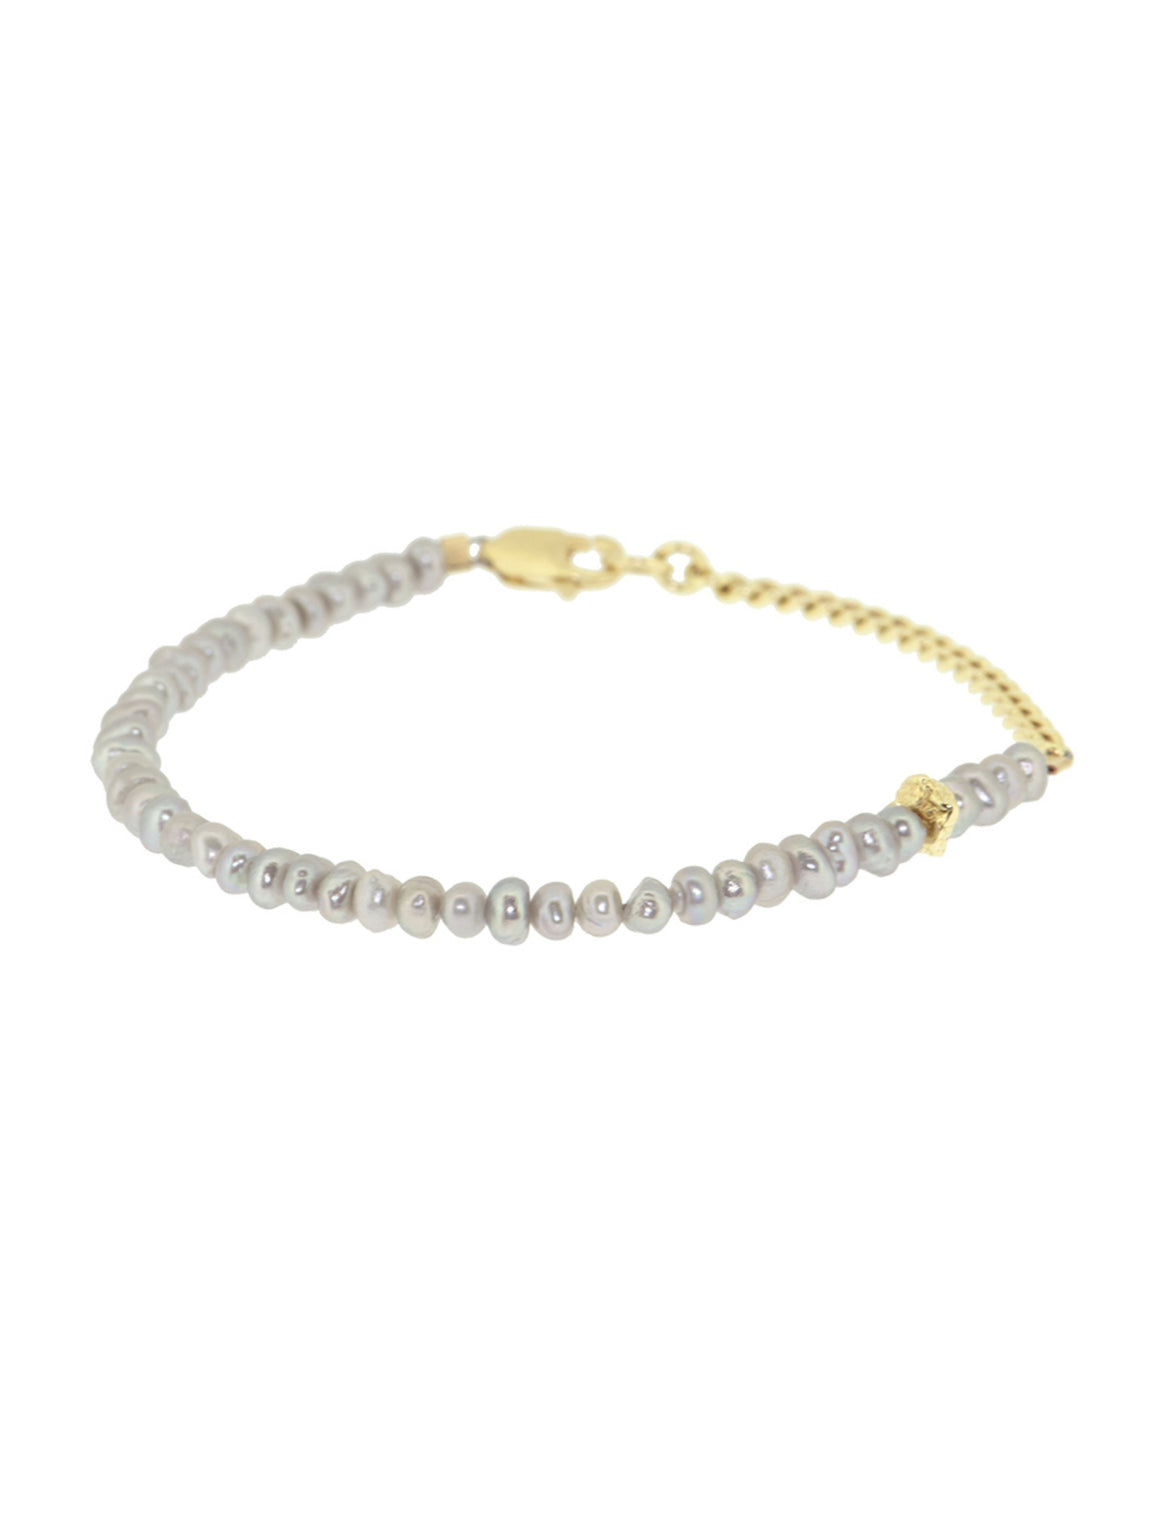 Love right back - Grey Pearl | 14K Gold Plated